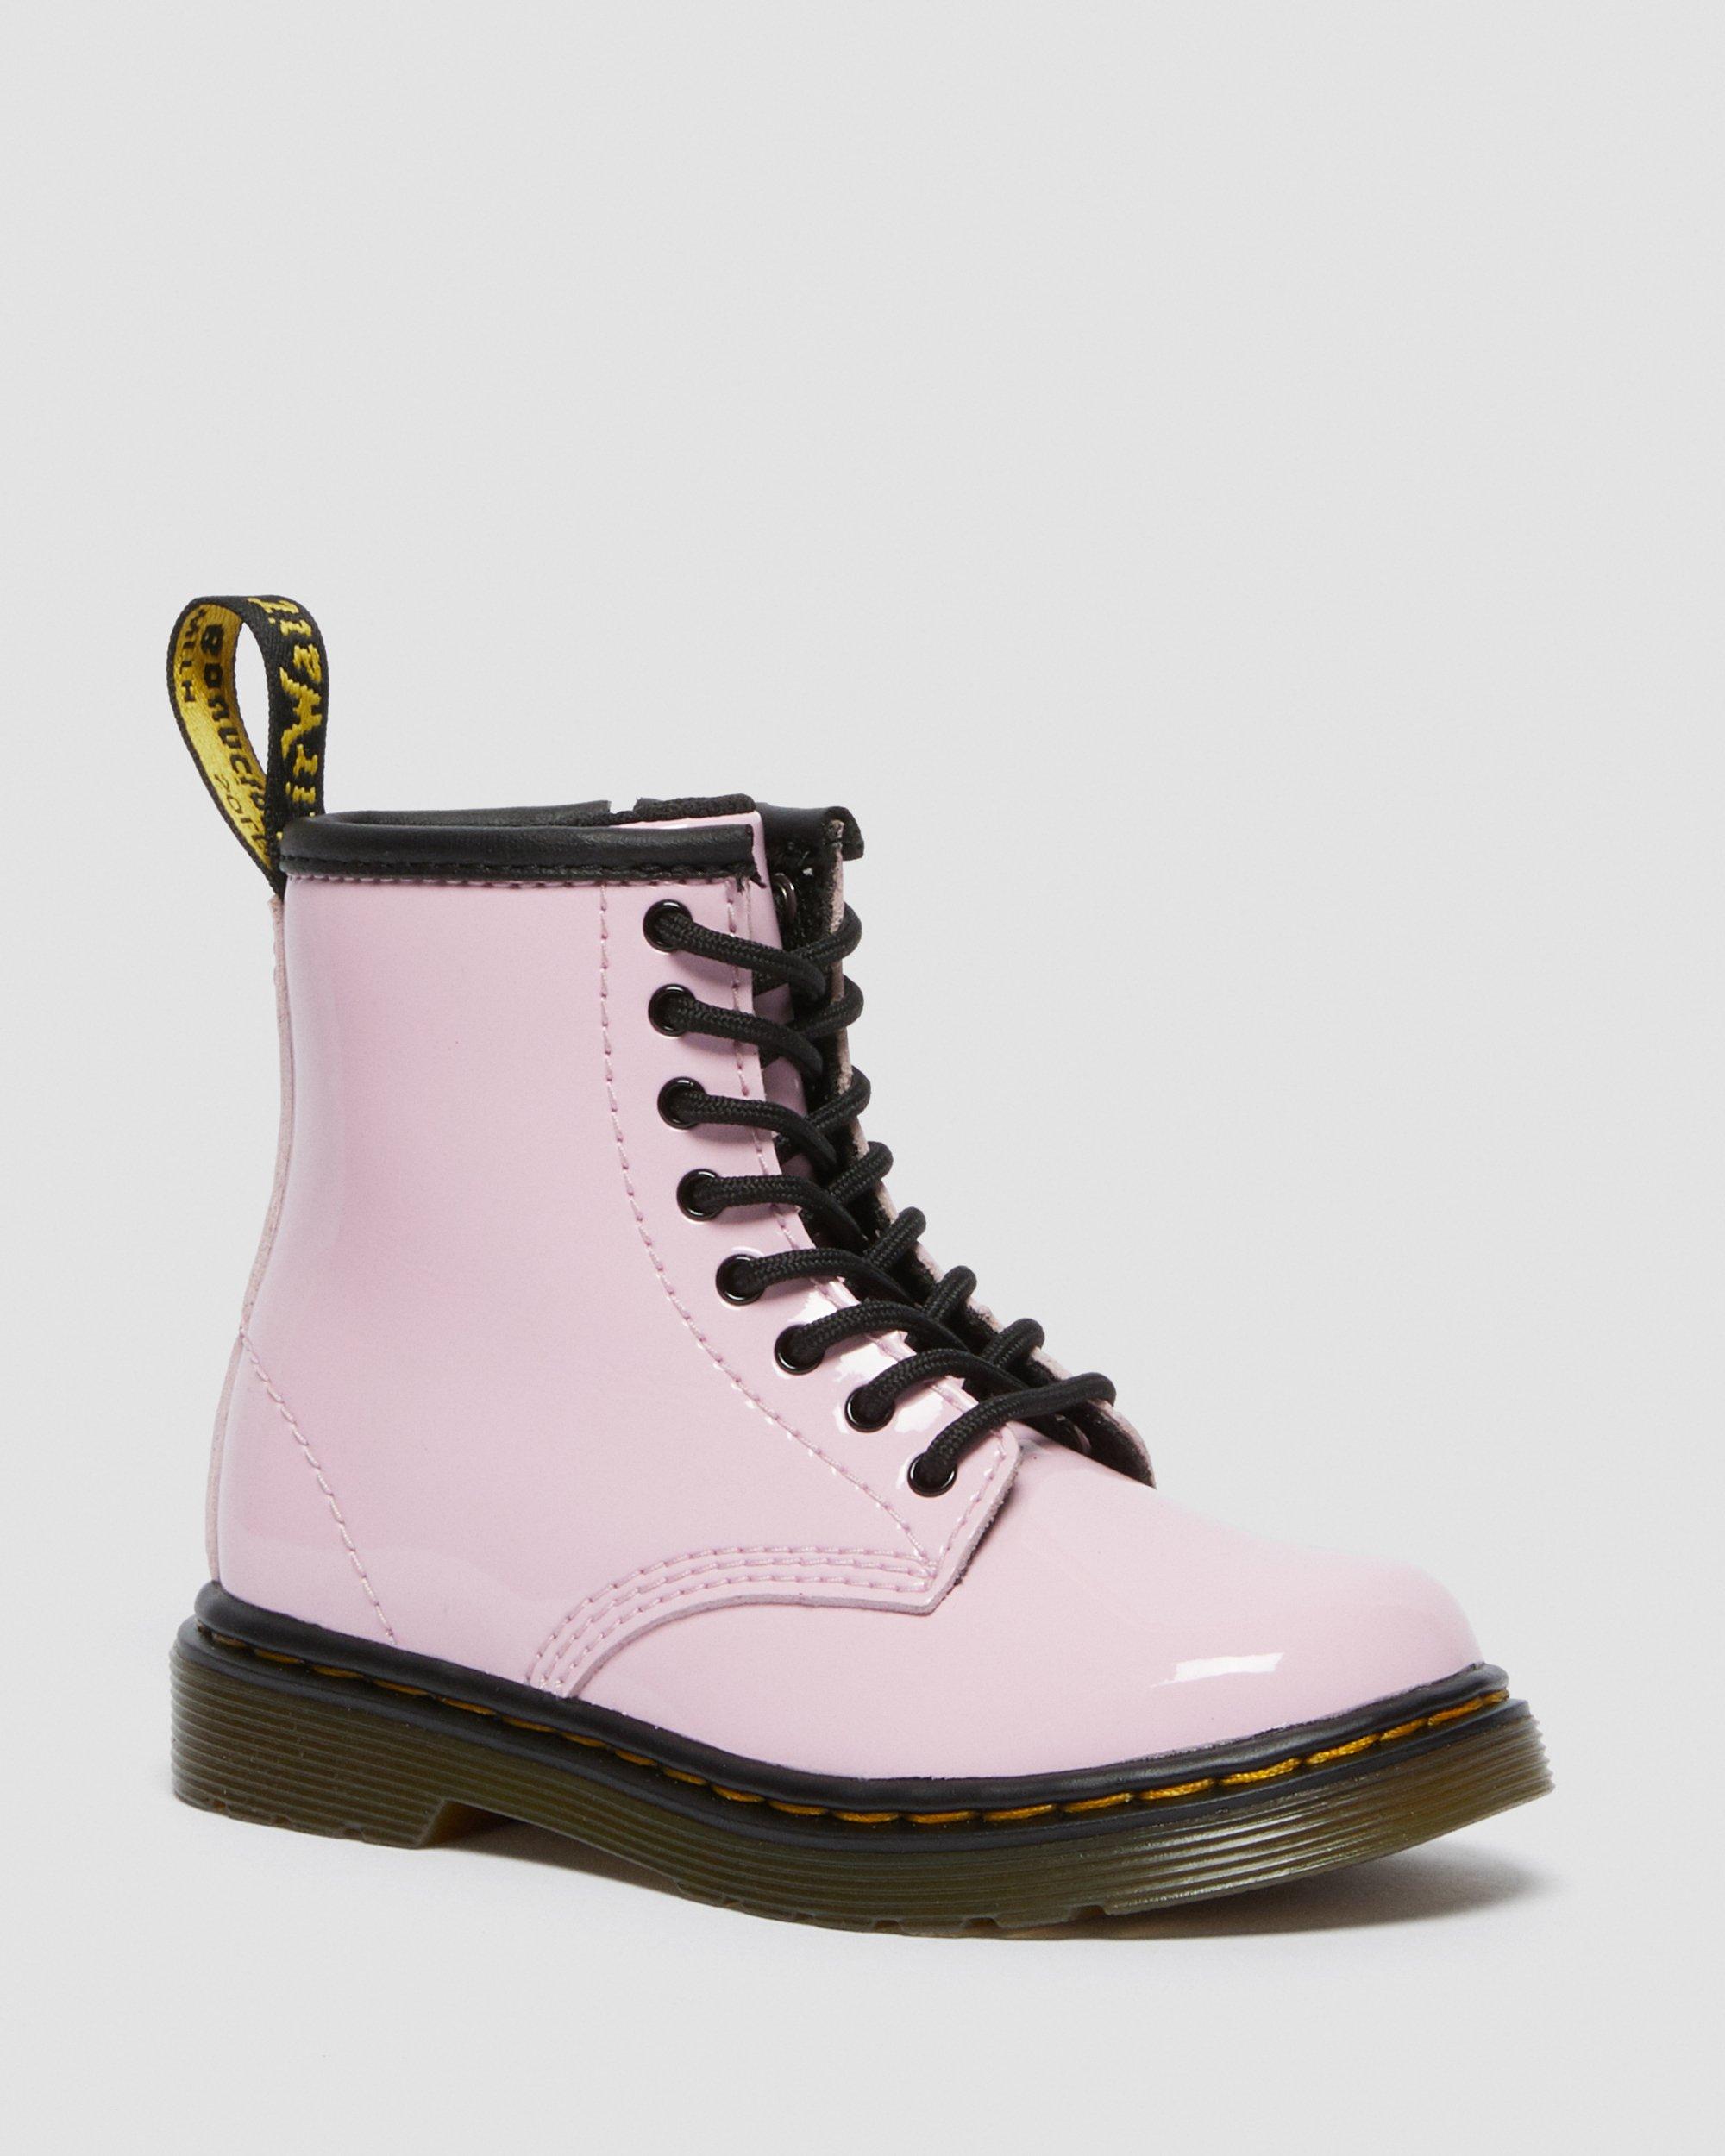 Toddler 1460 Patent Leather Lace Up Boots in Pale Pink